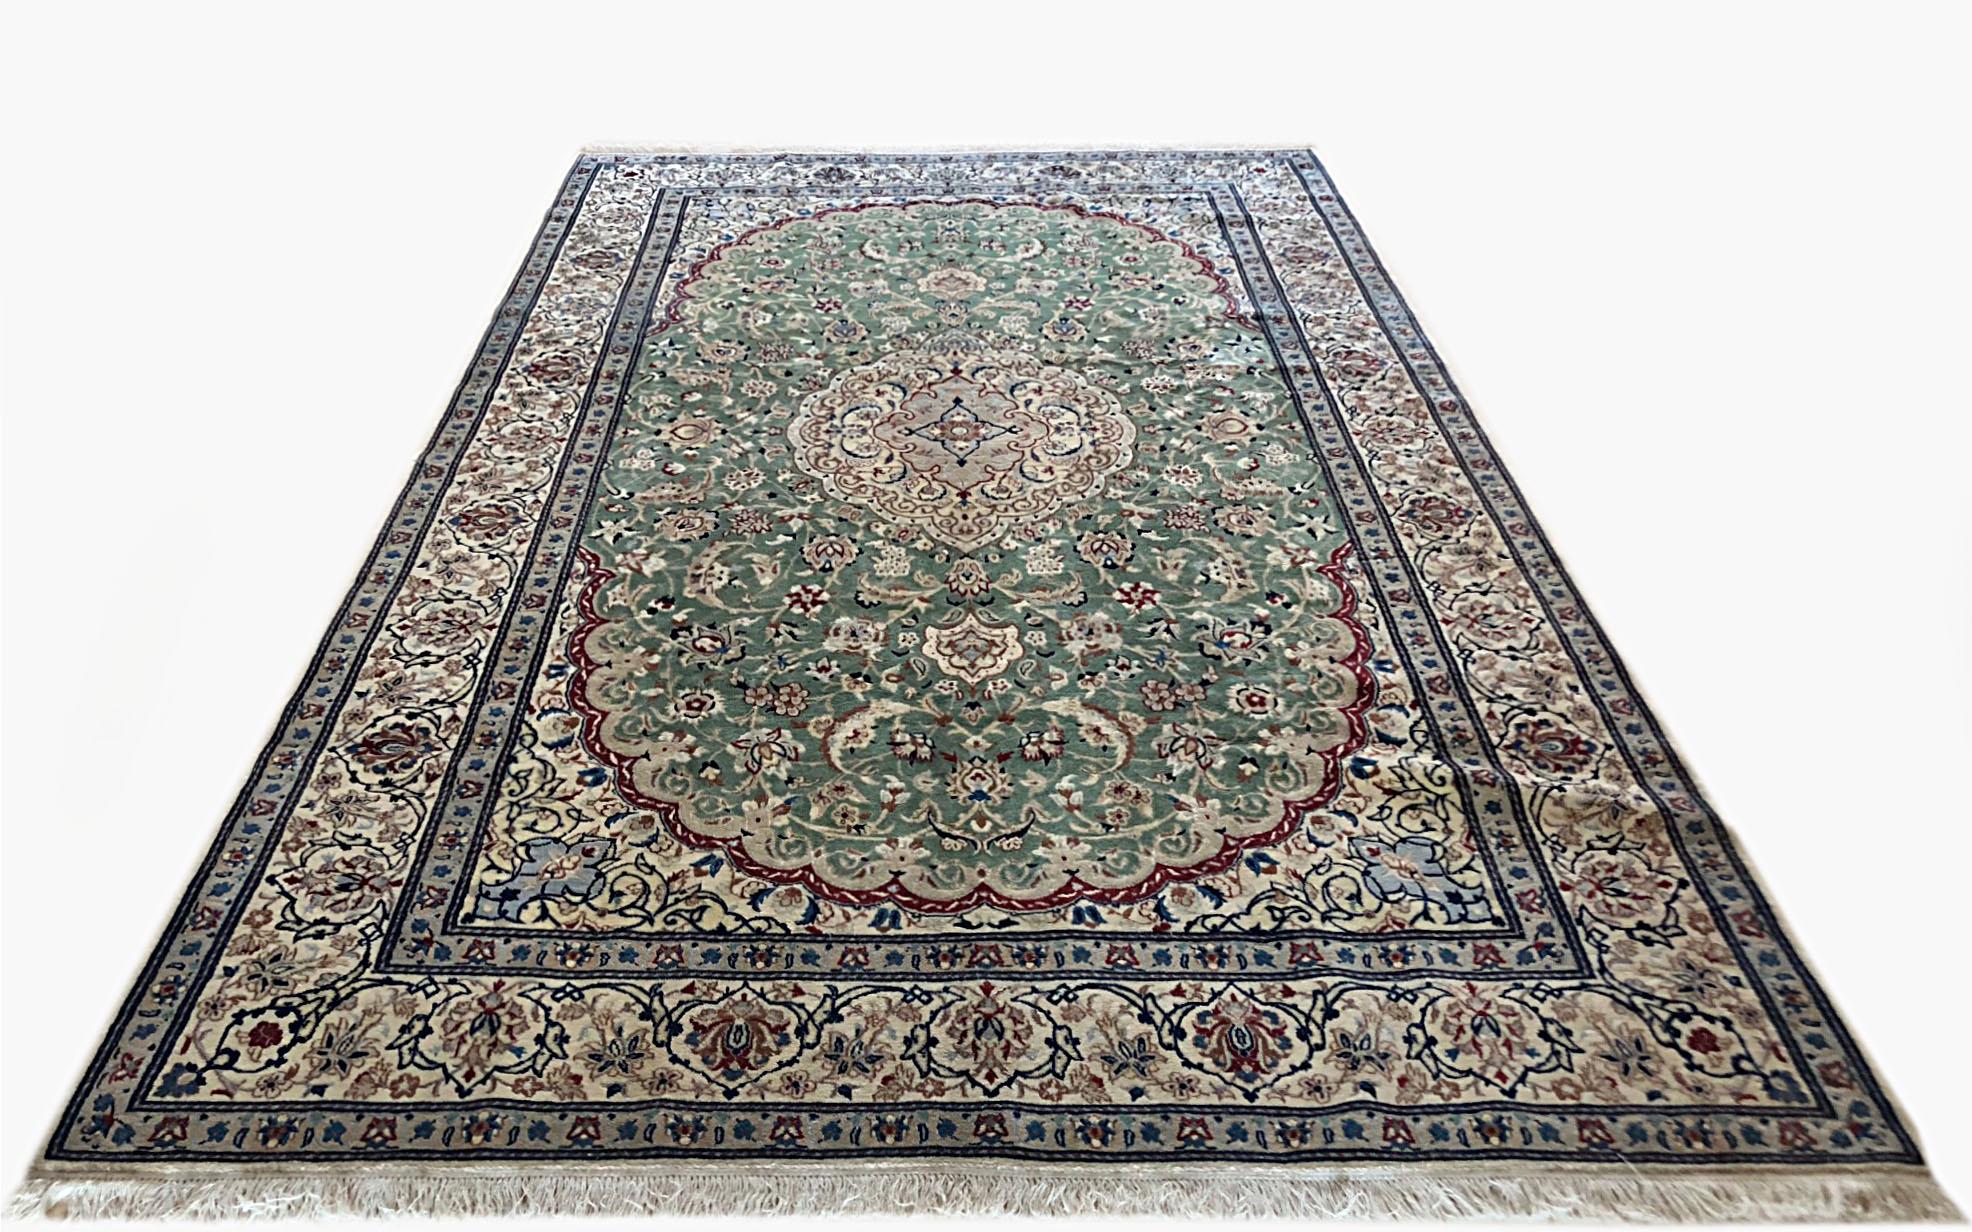 Persian authentic hand-knotted Nain rug with wool pile and cotton foundation. The design is medallion floral. The base color is green with cream border color. Size is 6Ft 7